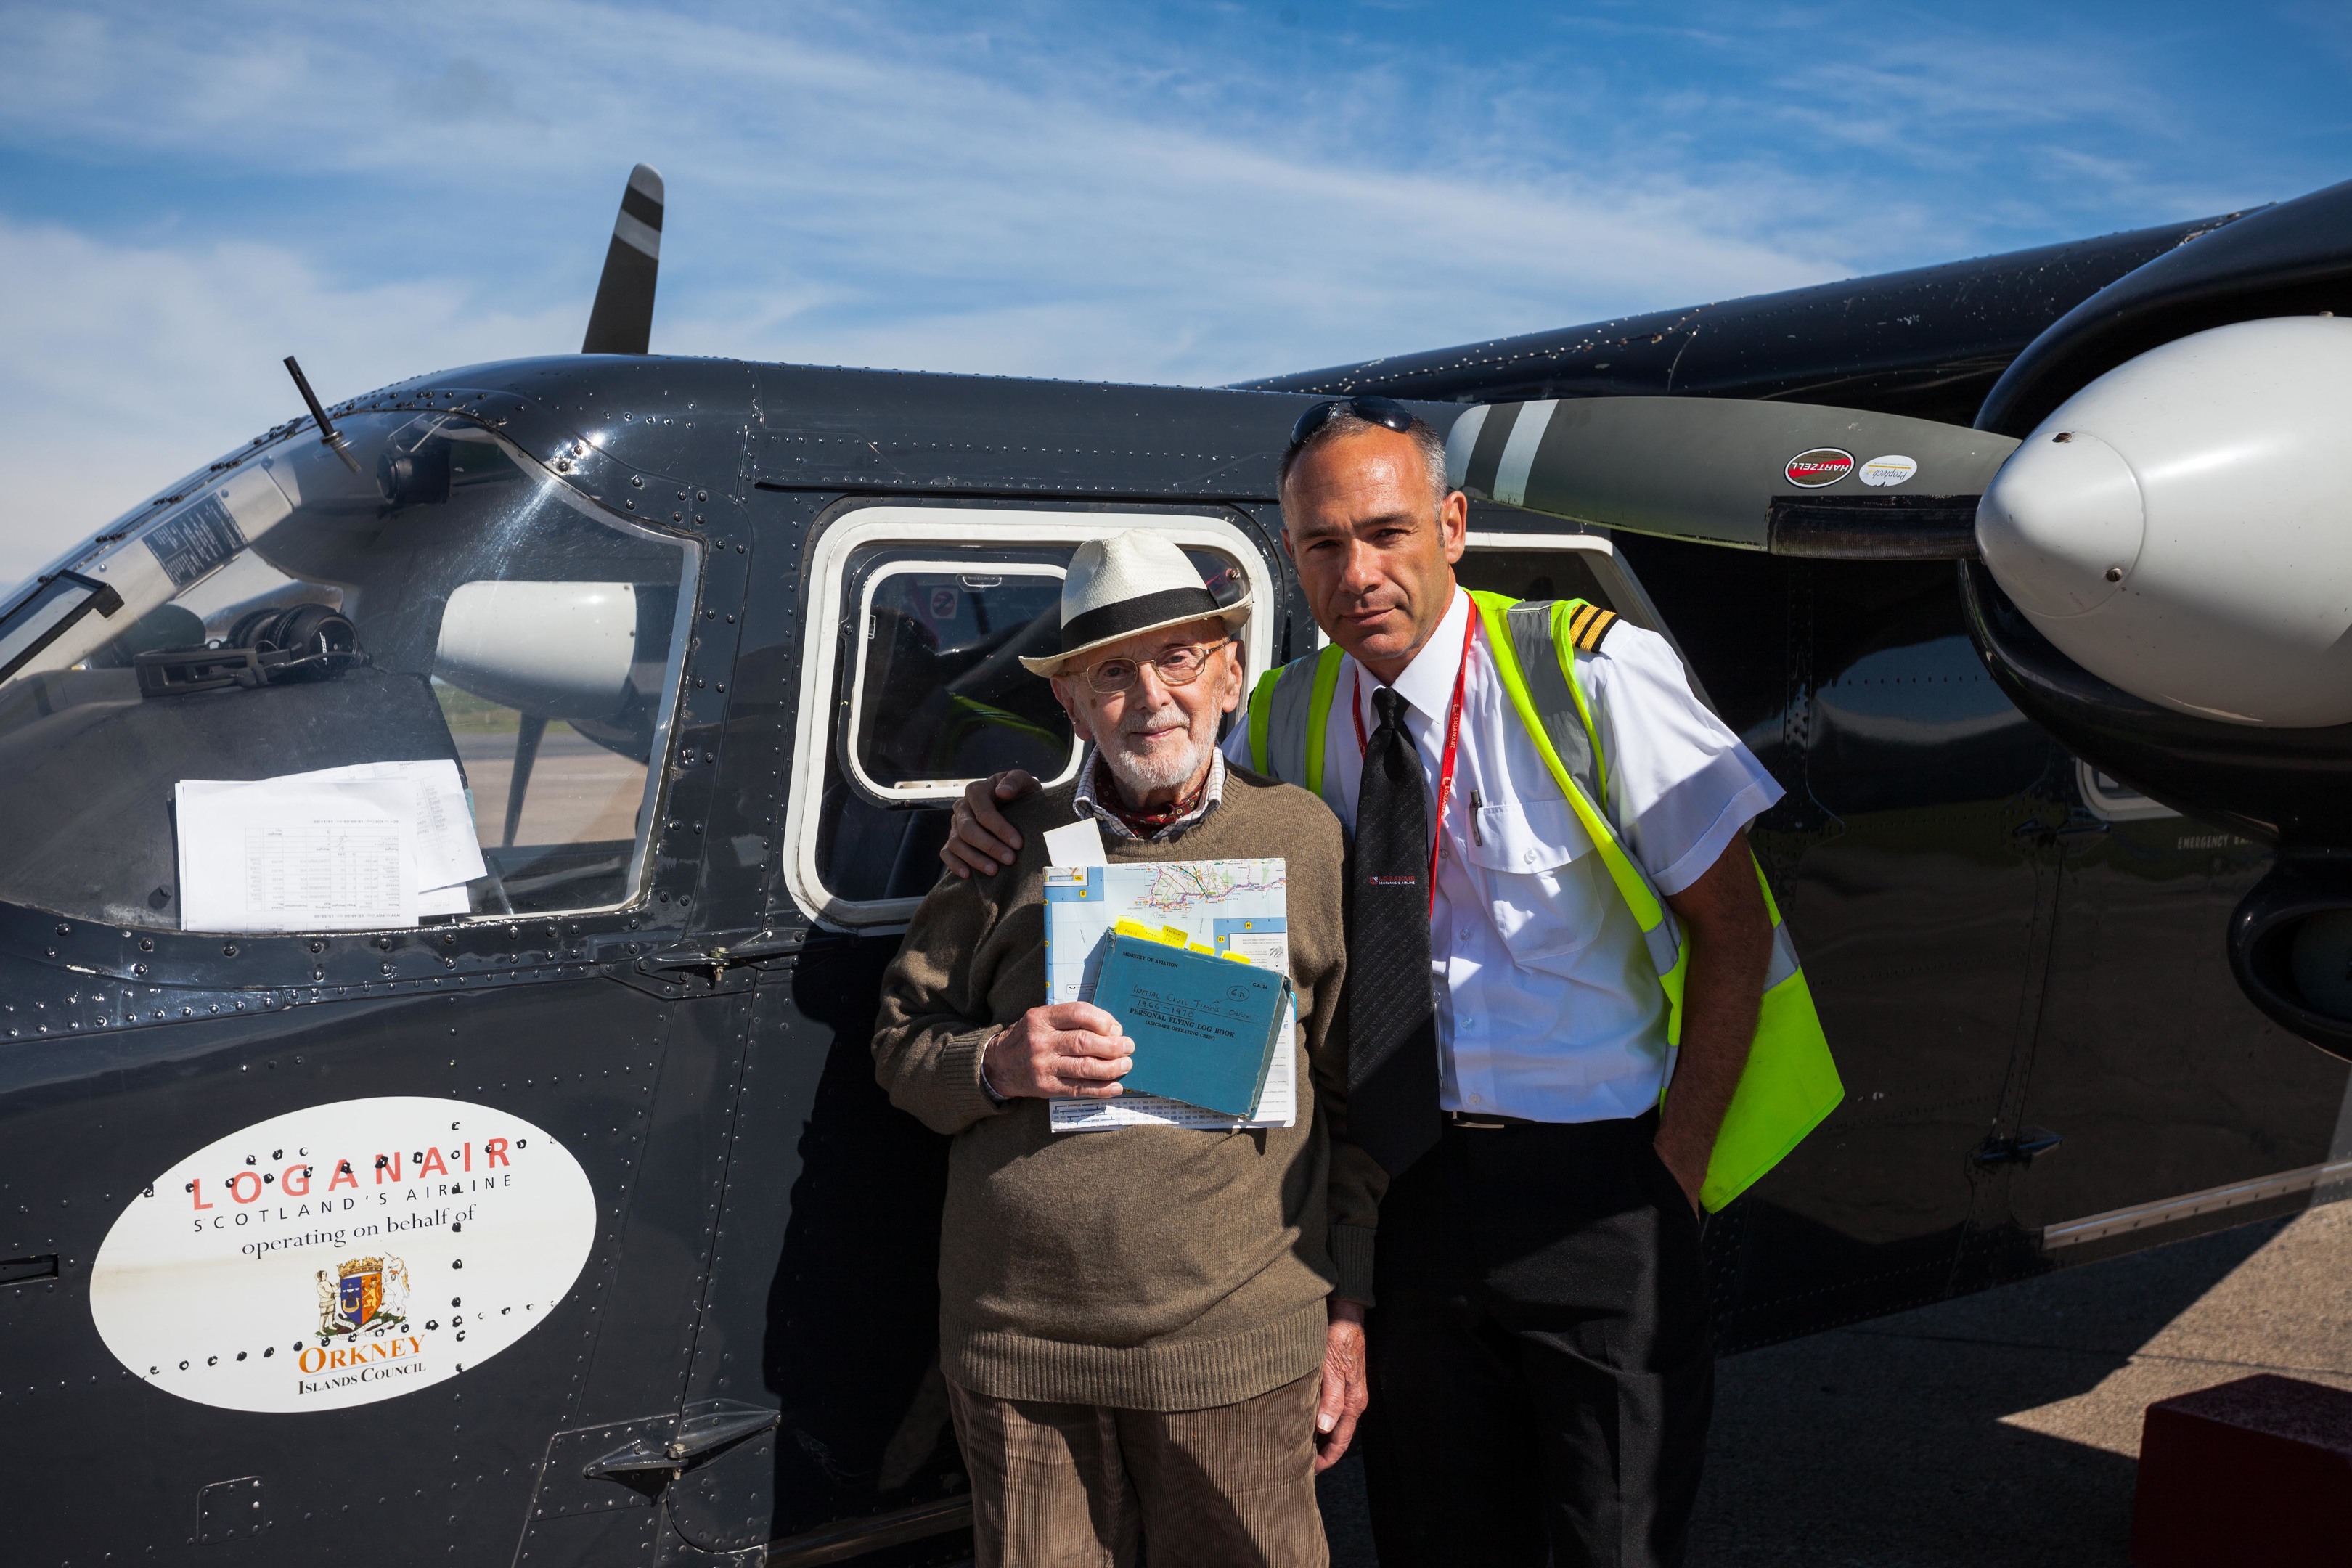 Peter before his flight  with his log book and Loganair pilot Fabio Giovacchini. Photo by Premysl Fojtu